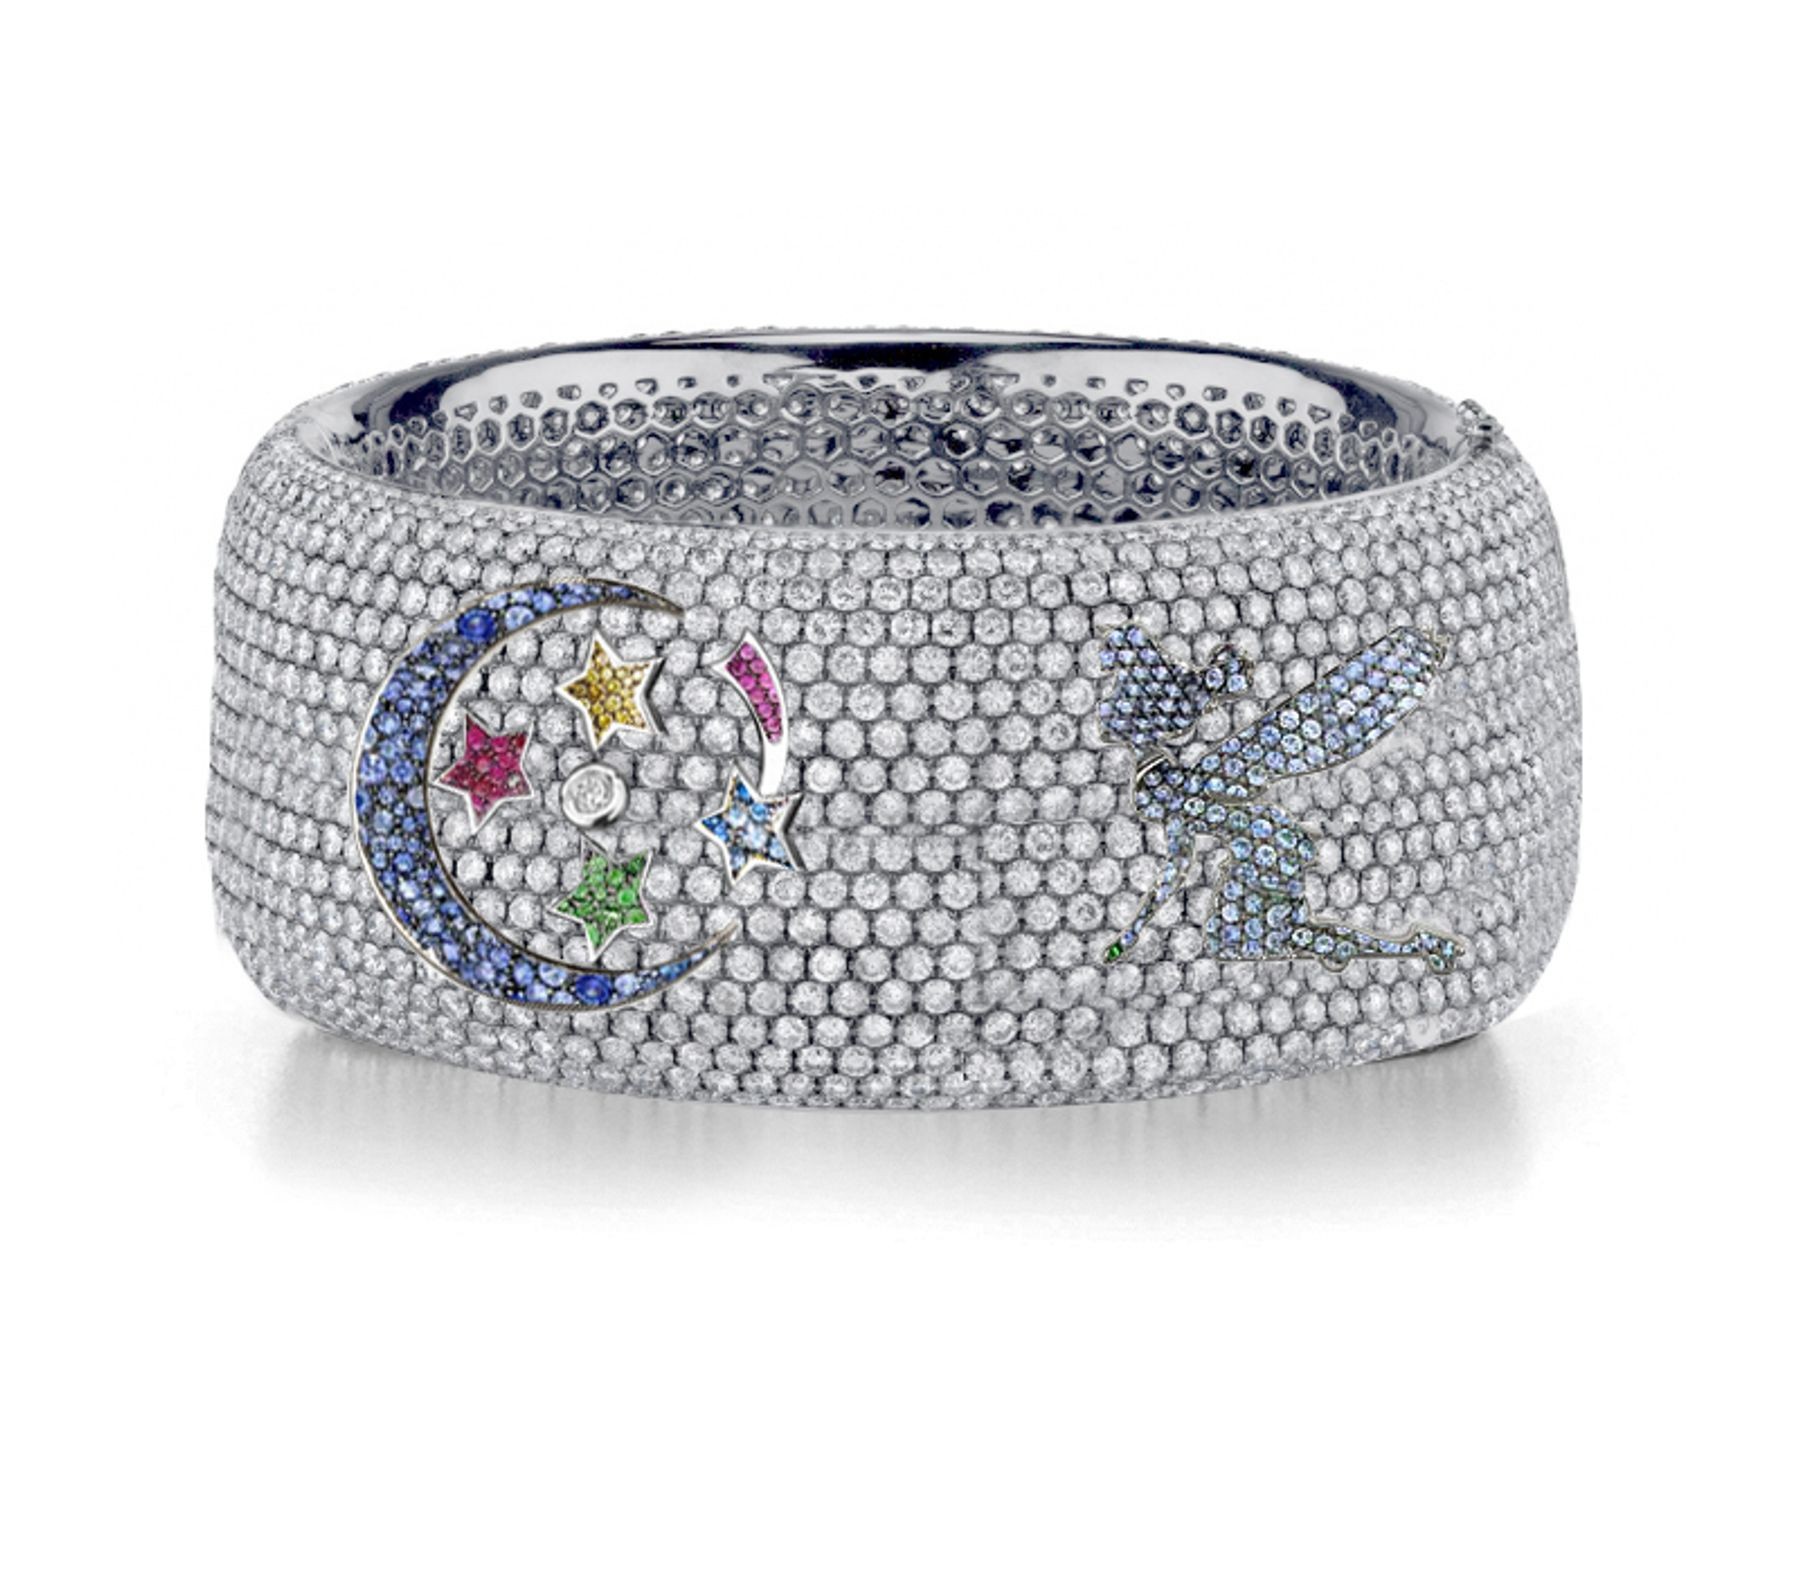 Delicate French pavee Sparkling Brilliant-Cut Round Diamonds & Vivid Multi-Colored Precious Stones Eternity Rings & Bands Featuring Fairy, Moon & Stars